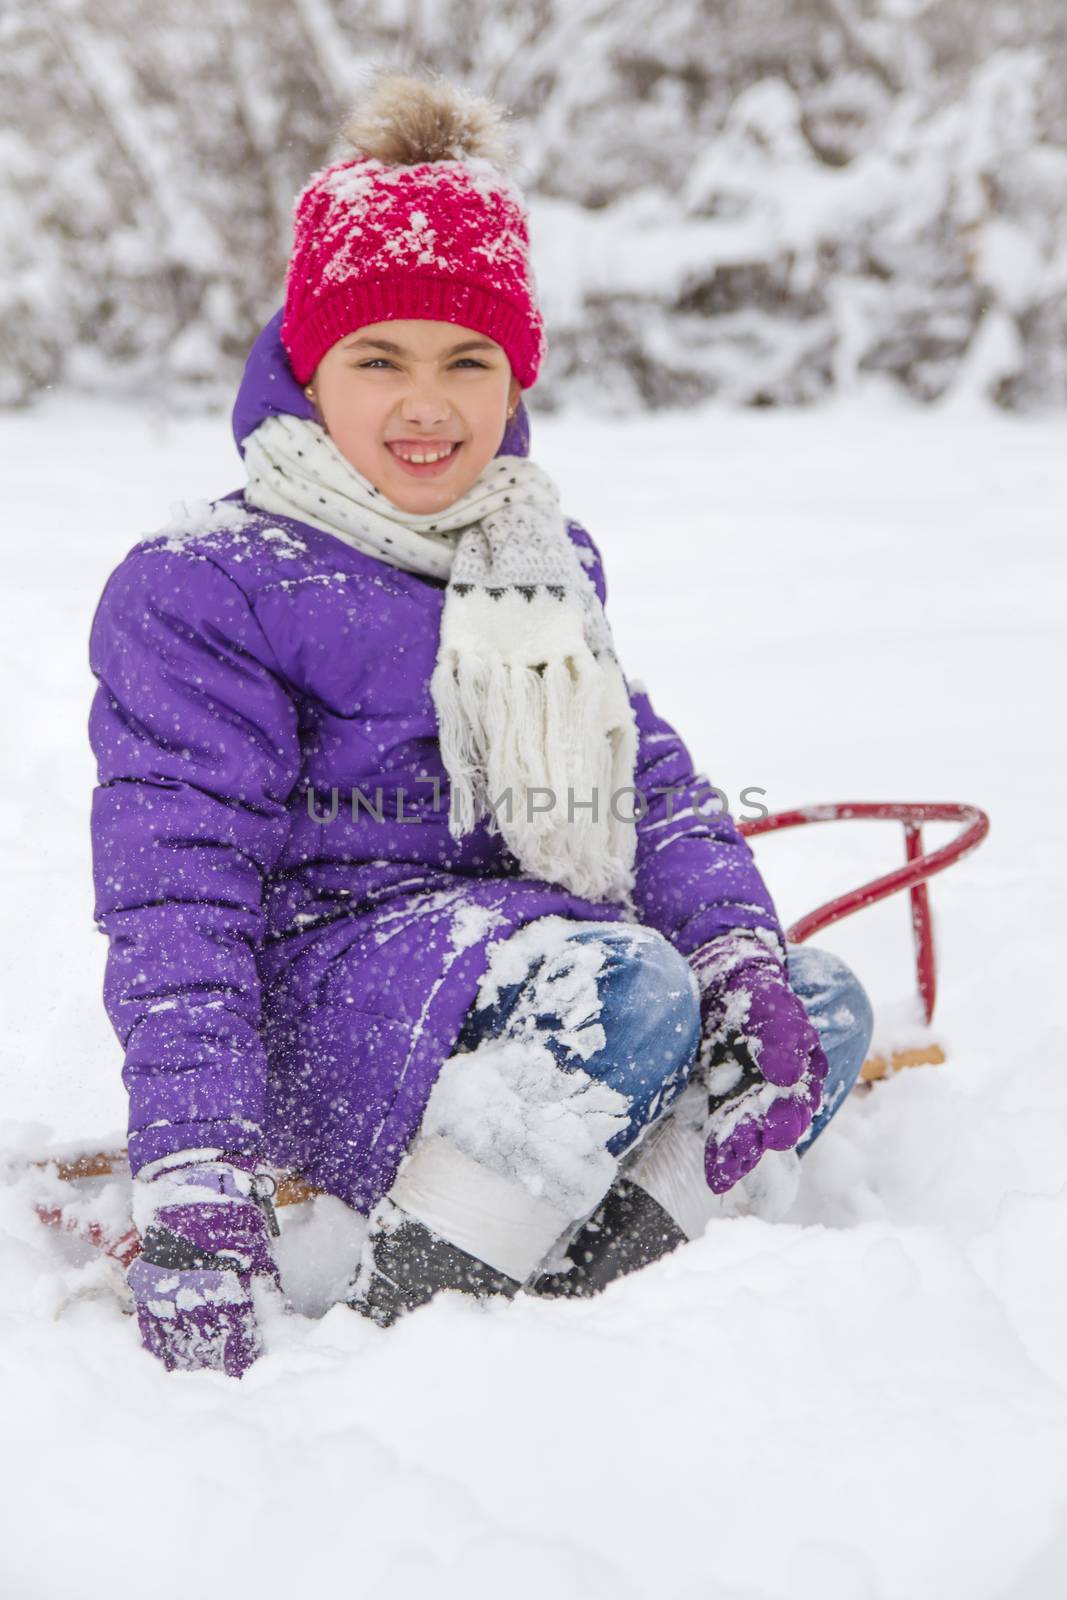 Sniling girl playing in snow in winter park